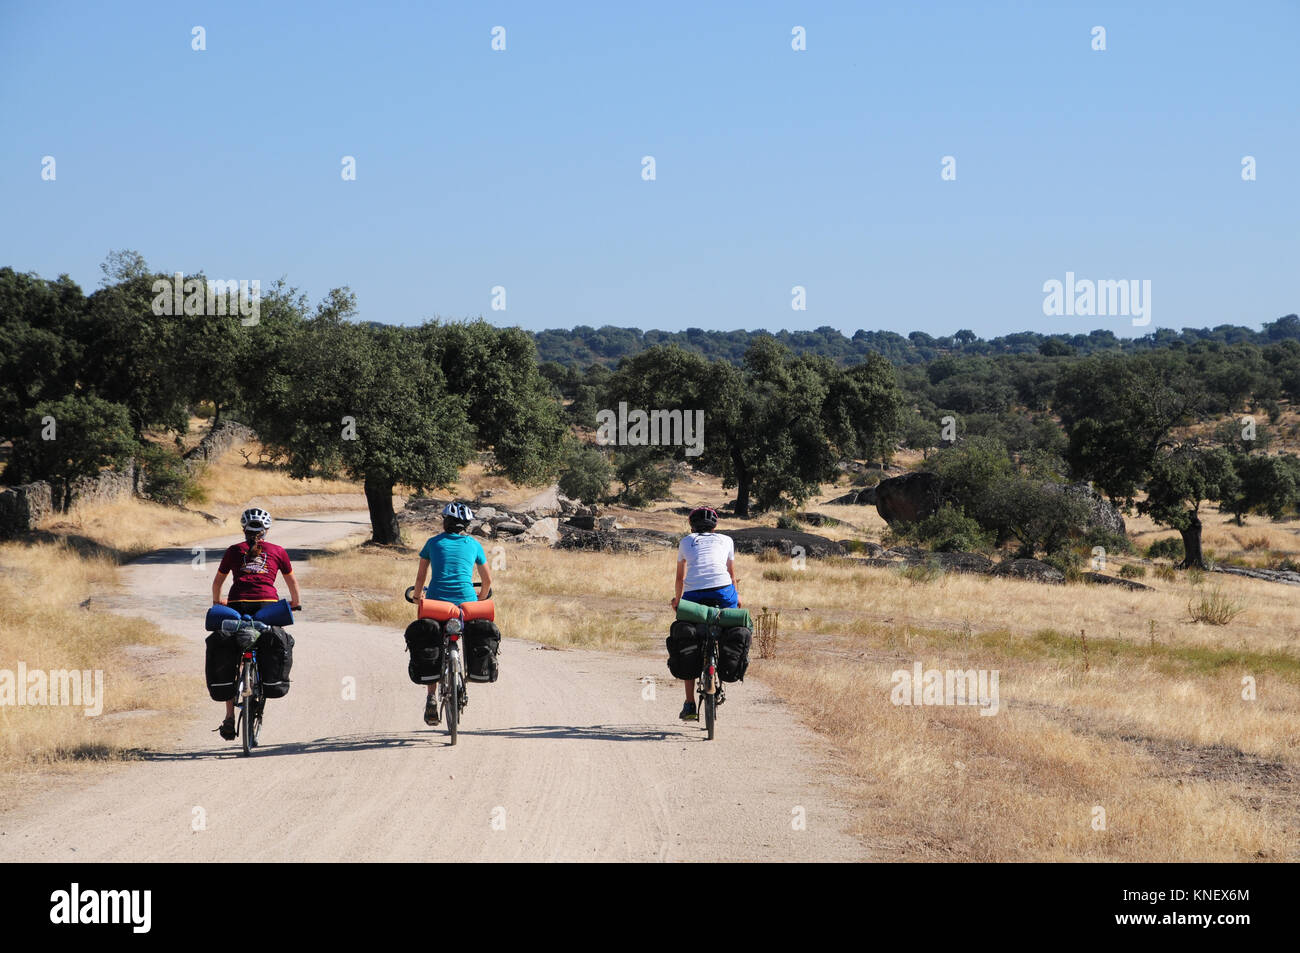 Three cyclists on the Via de la Plata camino route in Spain. They are cycling on a track through dehesa, dry scrubby grassland with scattered trees. Stock Photo